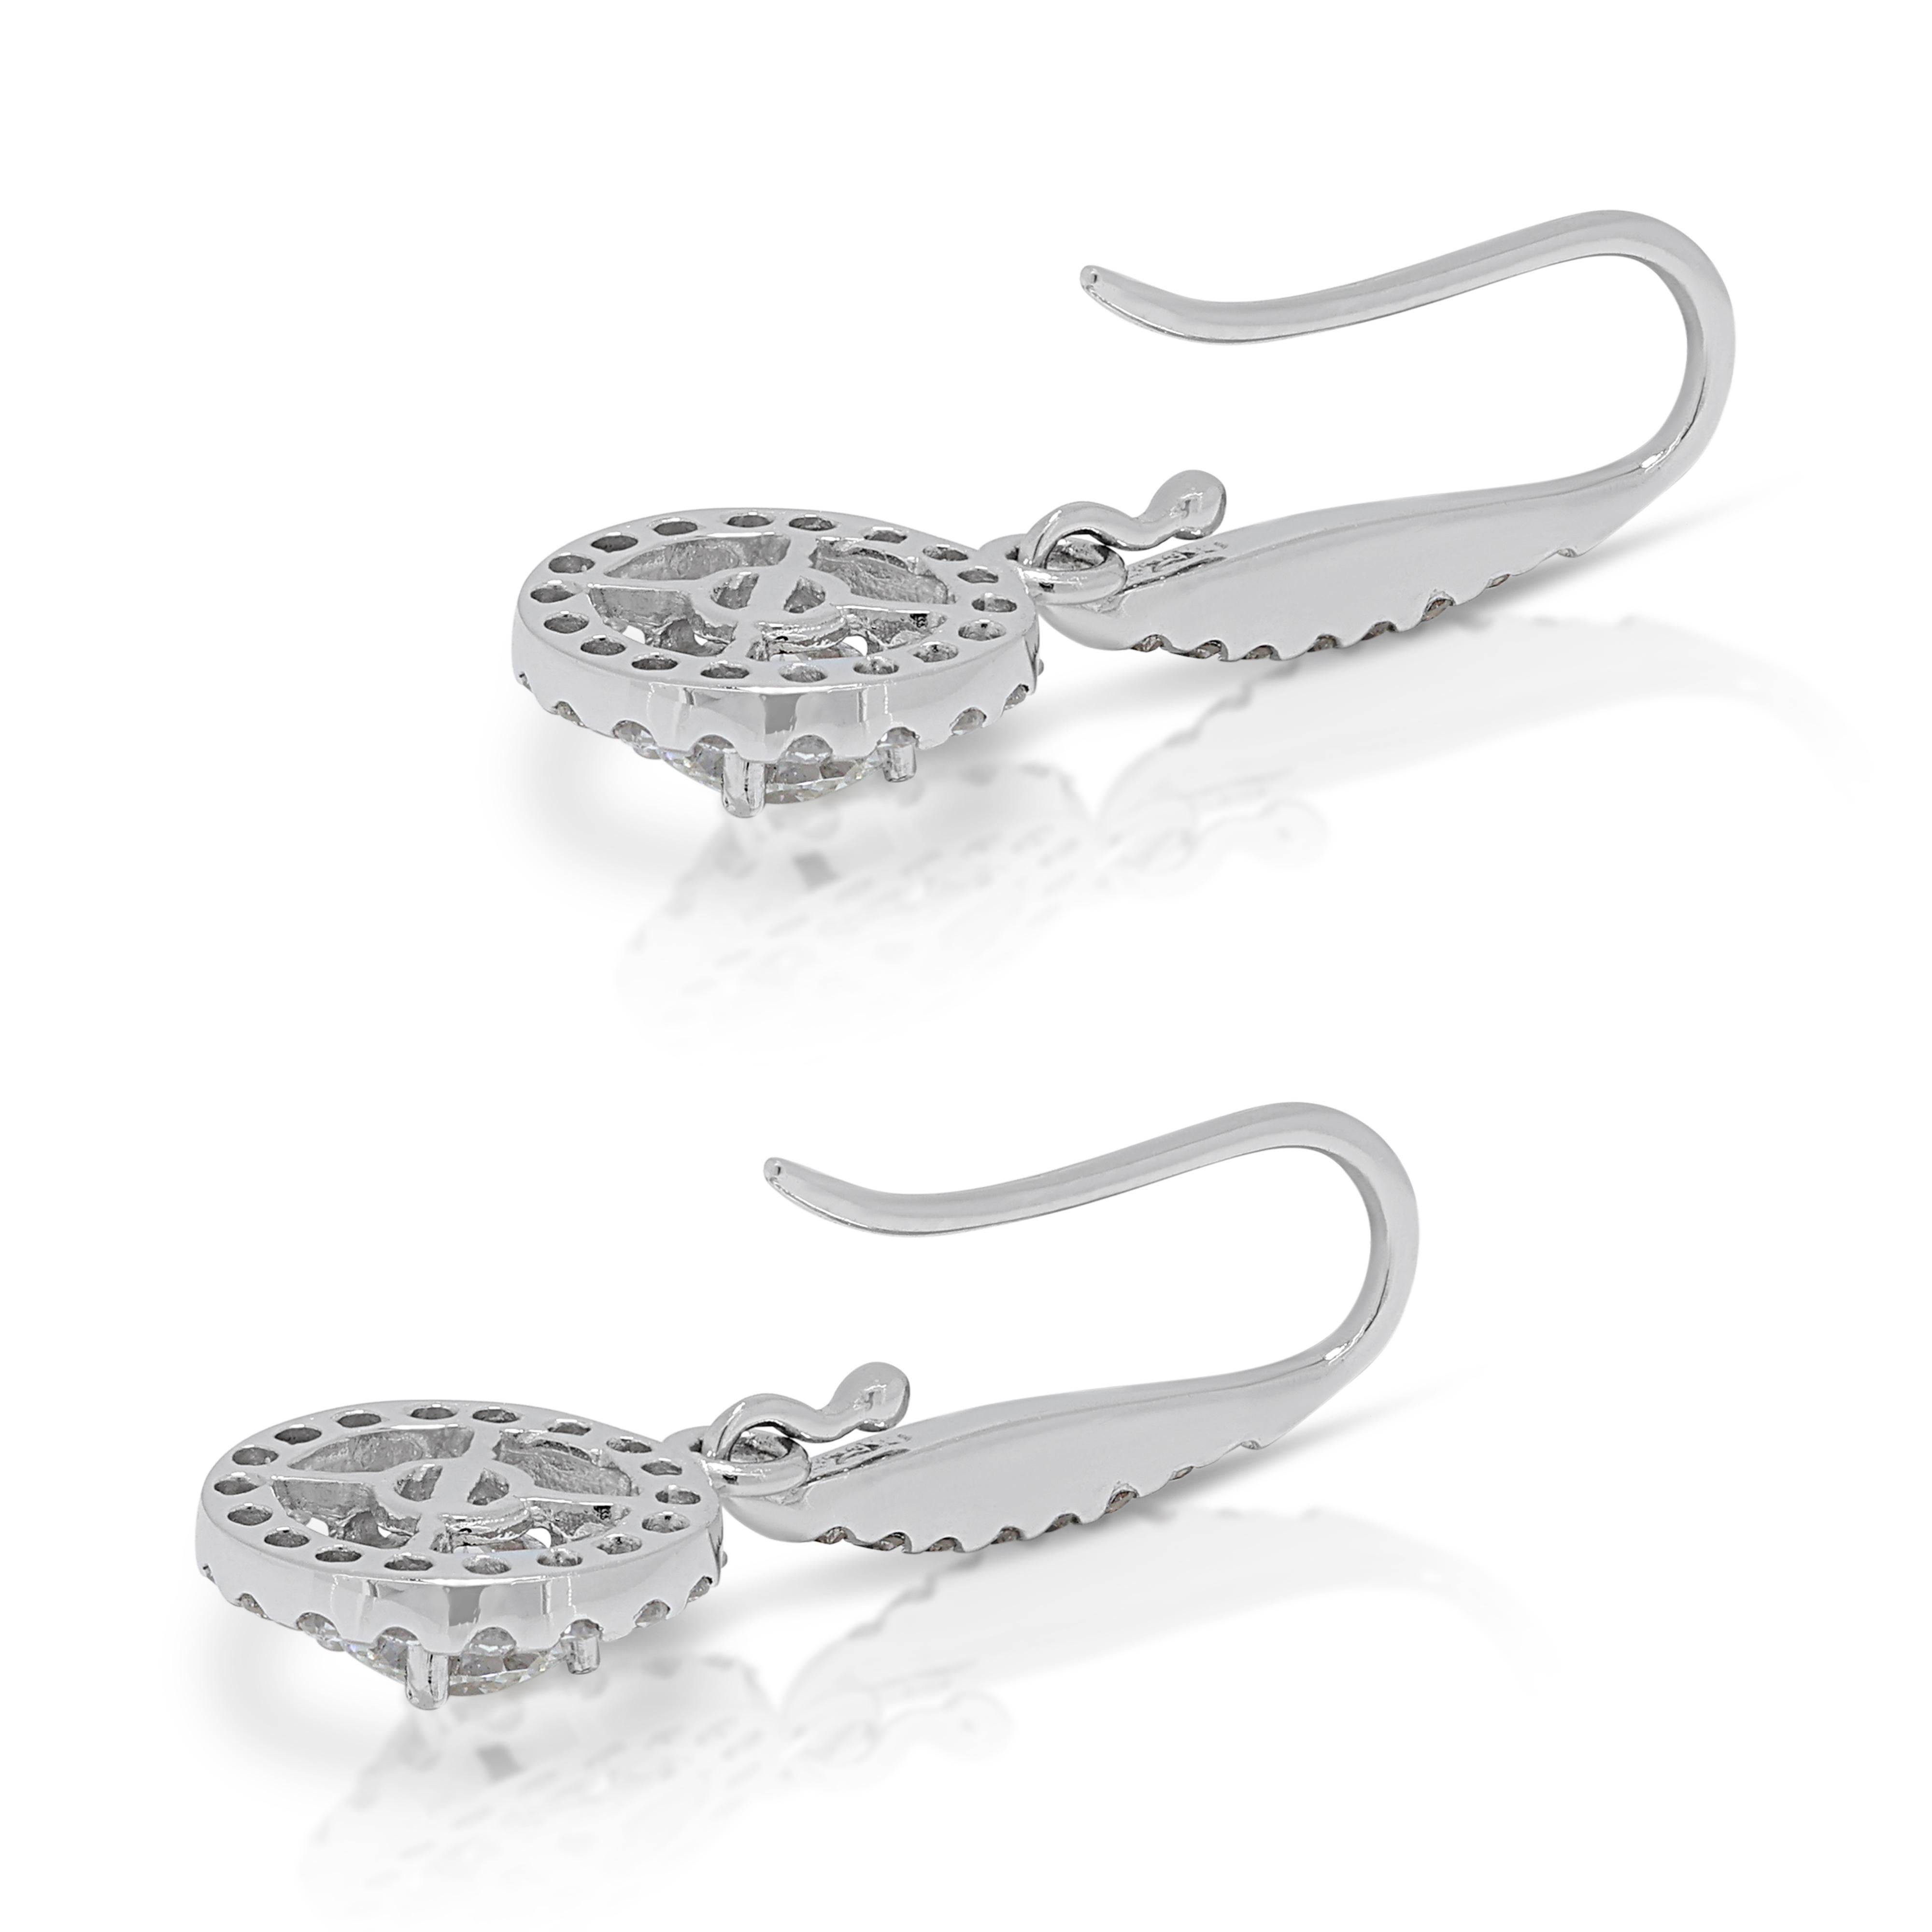 Fascinating 0.86ct Diamond Dangling Earrings in 18K White Gold  For Sale 2